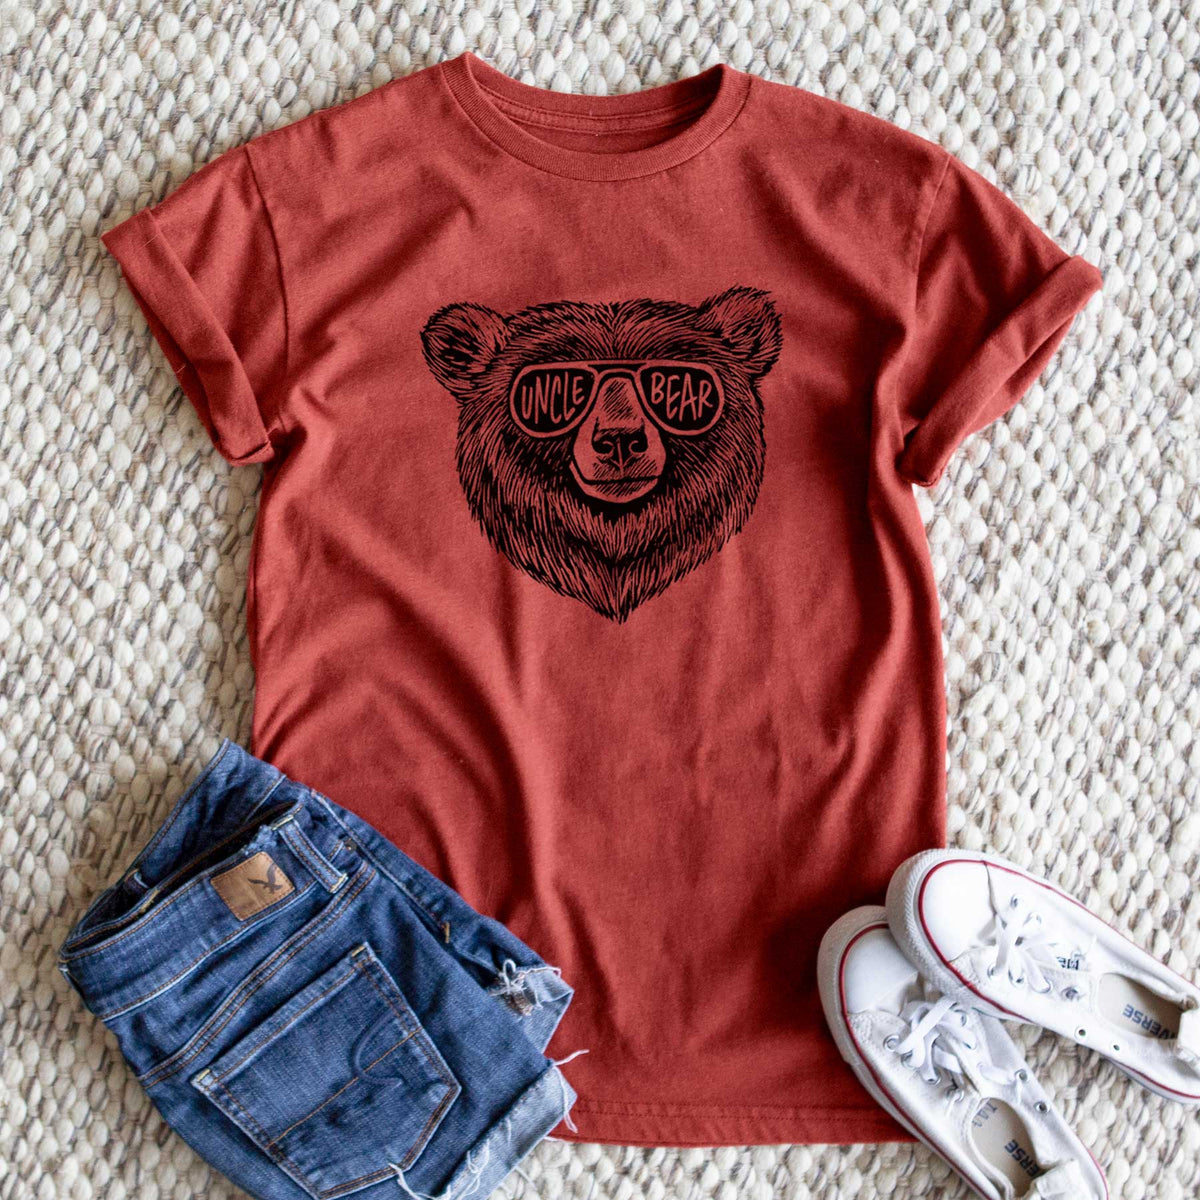 Uncle Bear - Unisex Recycled Eco Tee  - CLOSEOUT - FINAL SALE